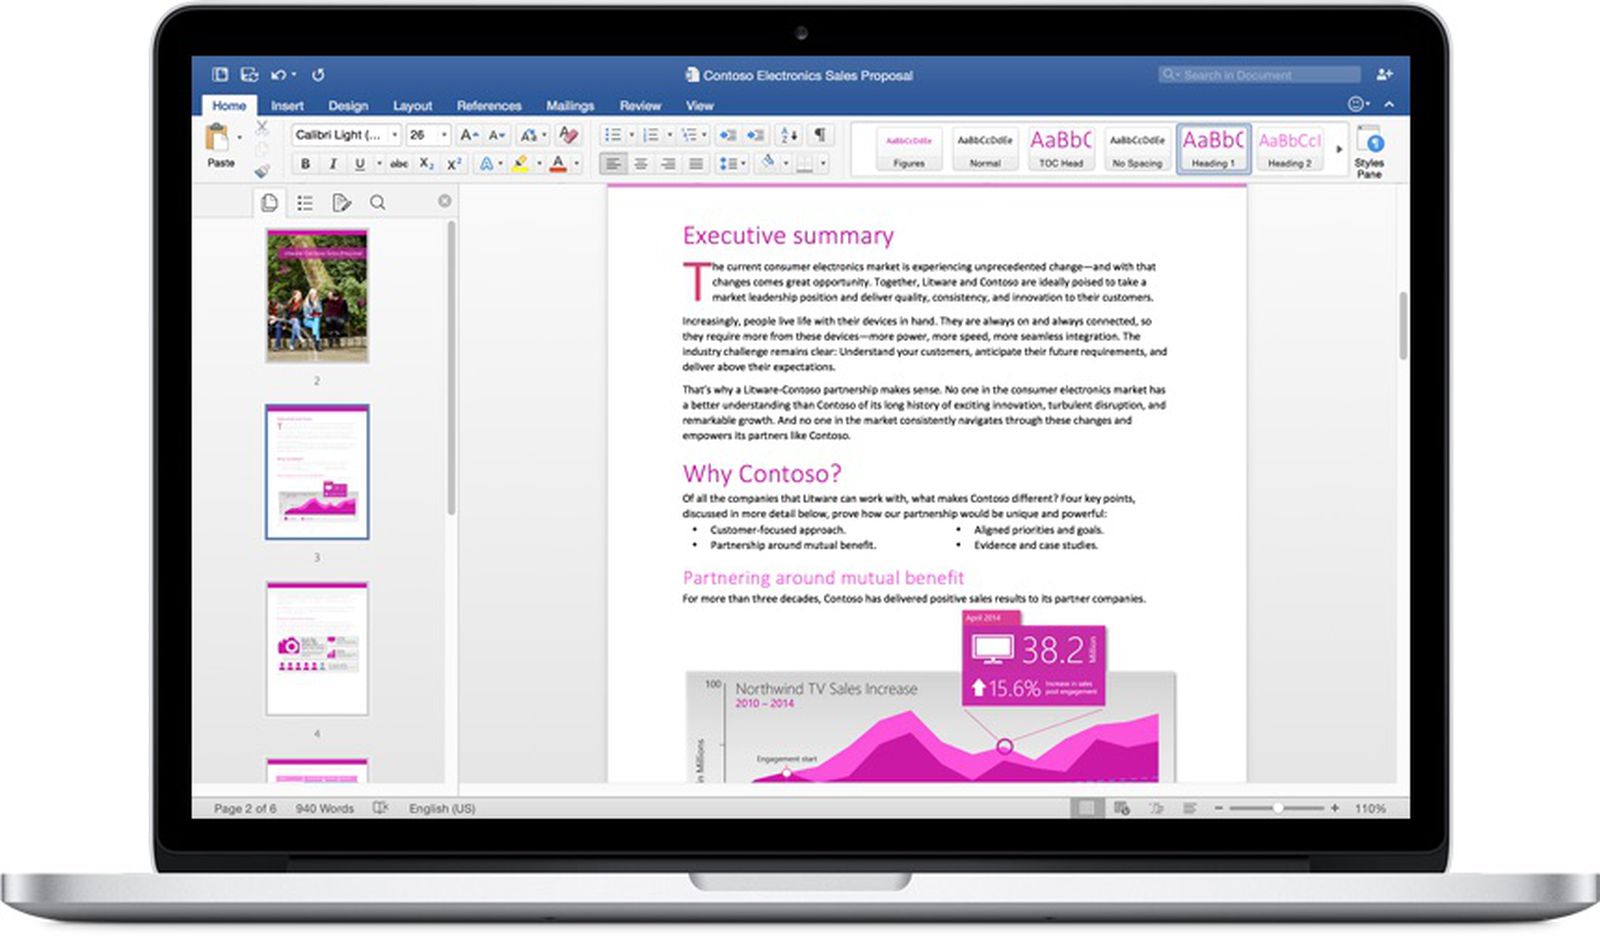 ms office 2016 for mac issues